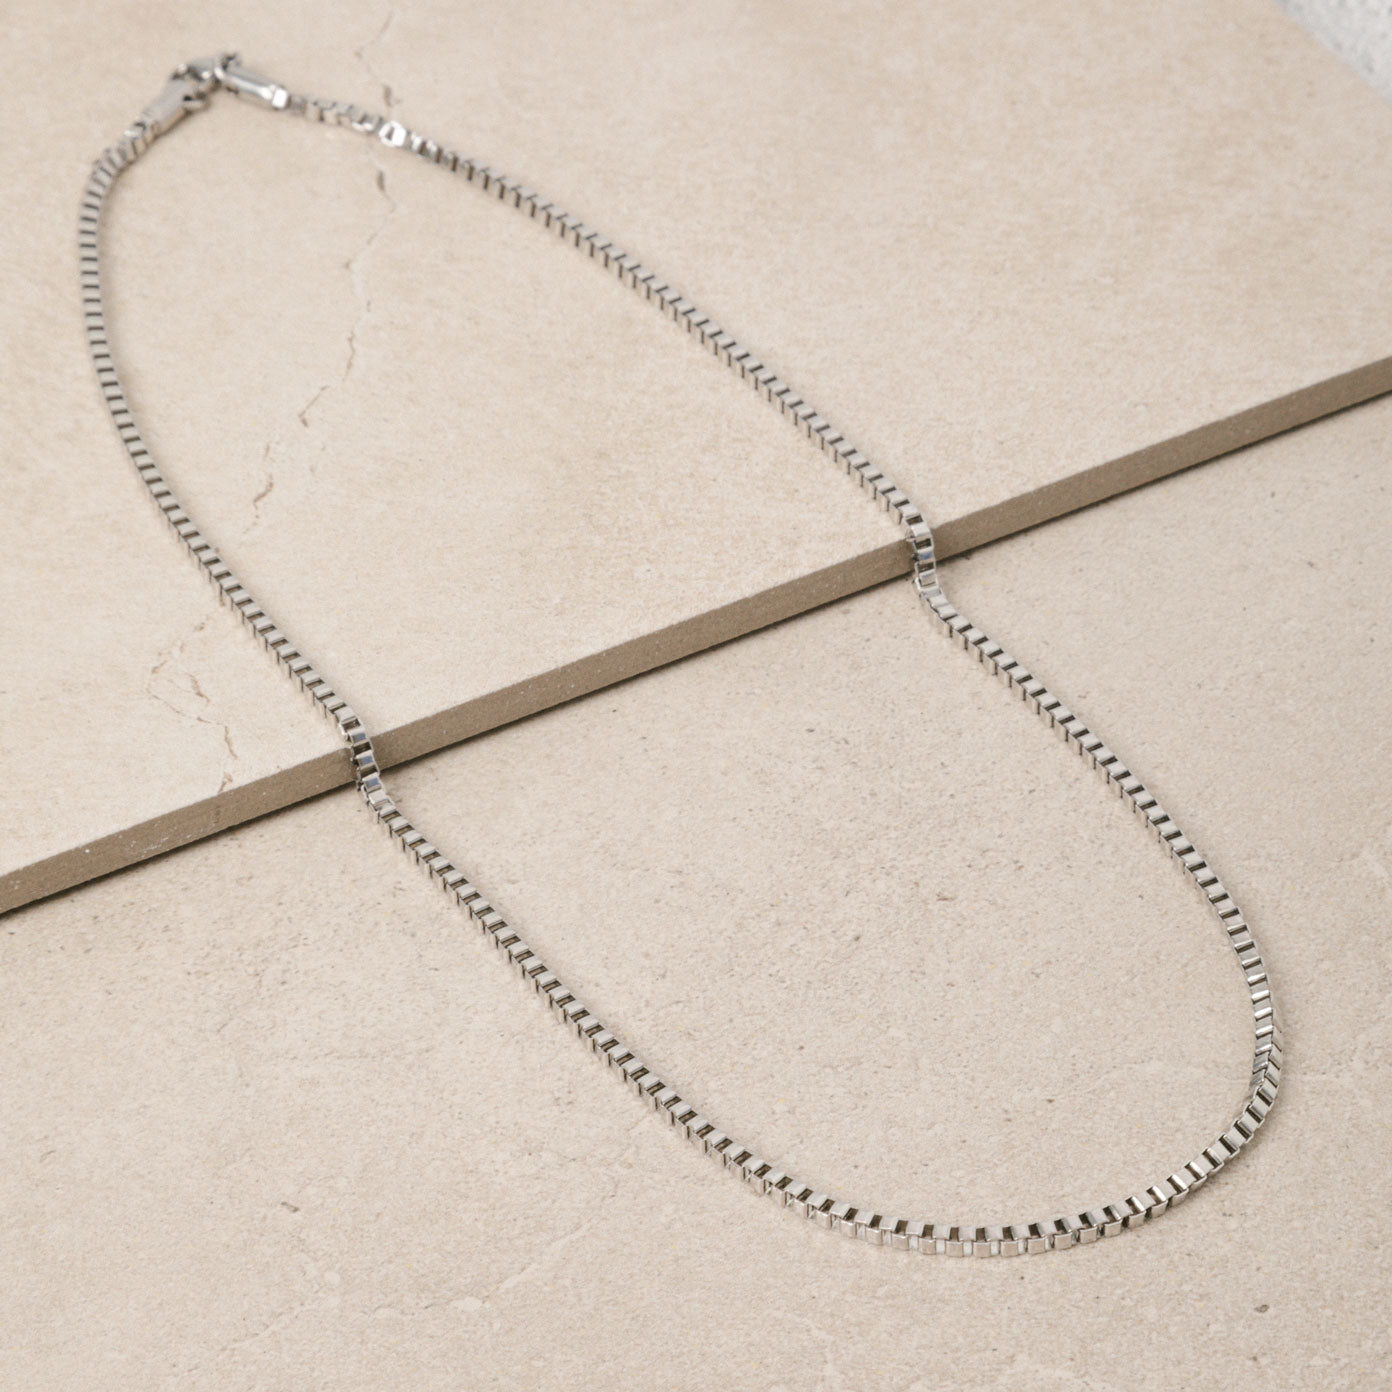 Image of the 3.5mm Square Box Chain crafted from high-grade Stainless Steel, measuring 22 inches / 56 cm in length and 2 mm in width. Weighing 5.8 grams, this chain is non-tarnishing and water-resistant.